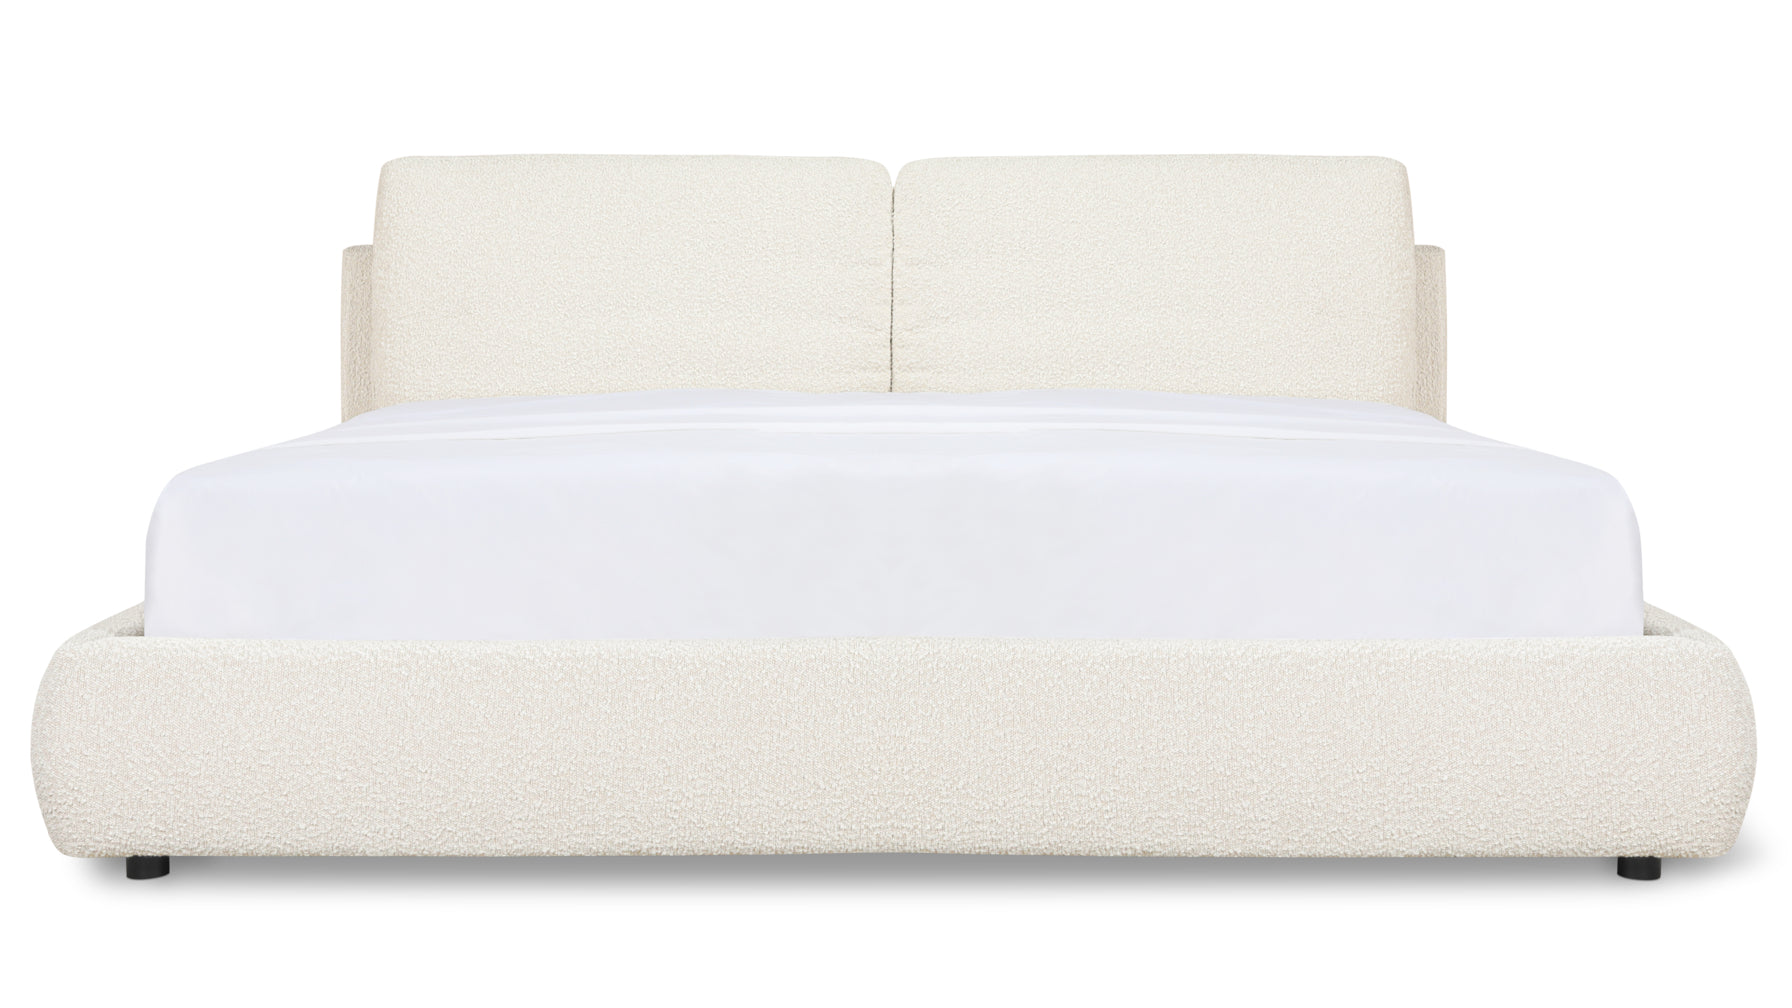 Cloud Bed with Storage, Queen, Cream Boucle - Image 1